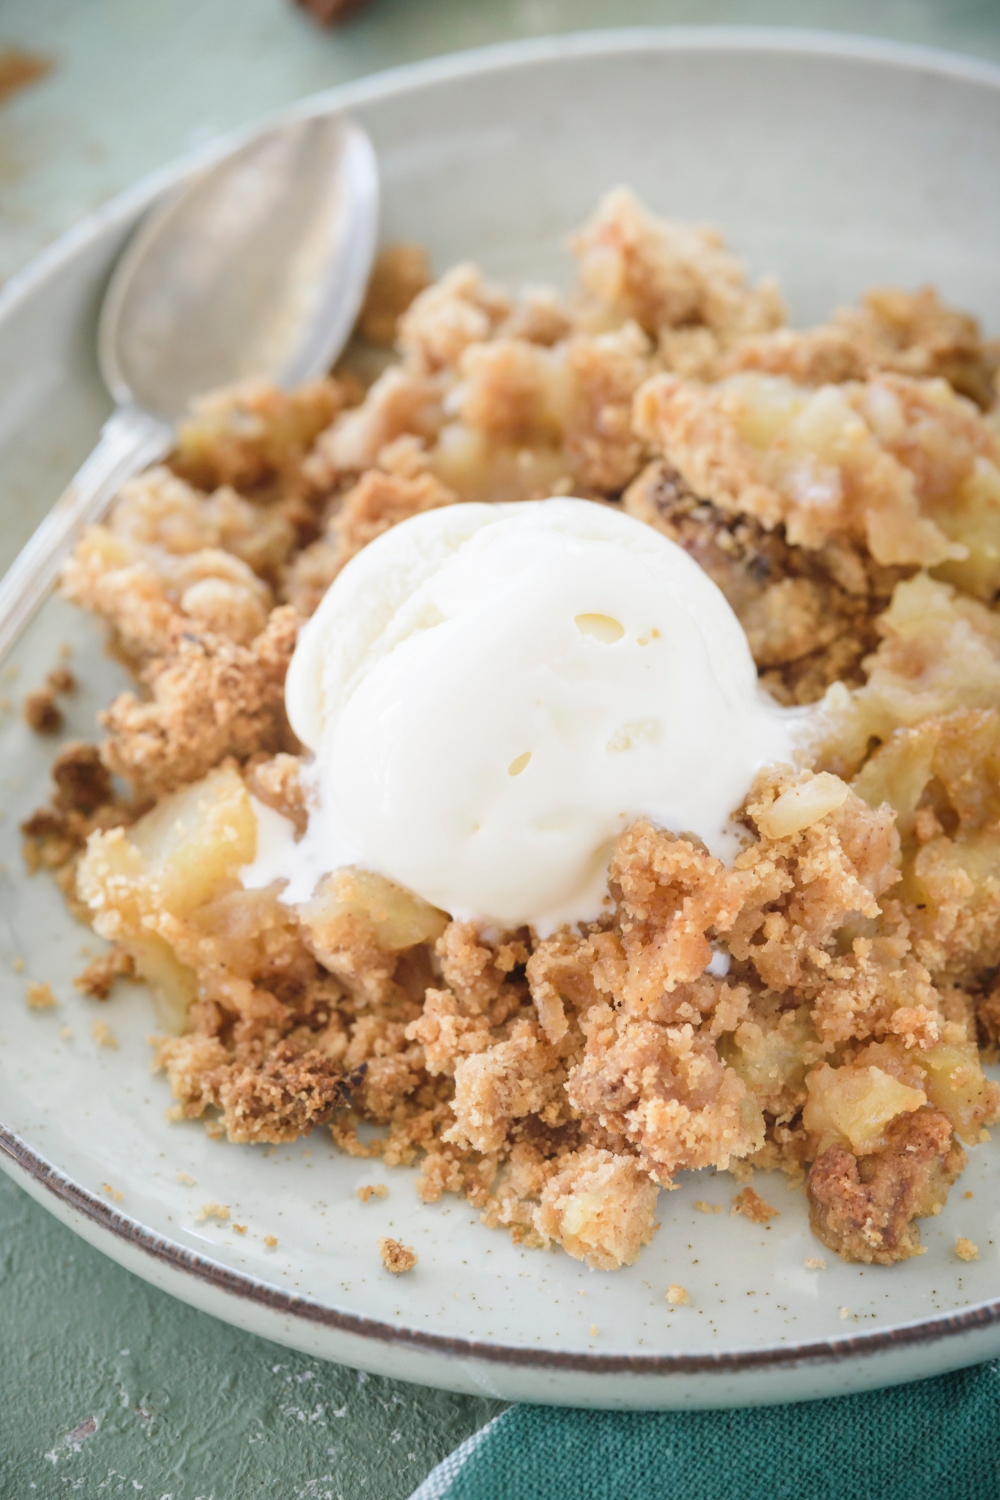 Apple crumble on a plate with a scoop of ice vanilla ice cream on top. The ice cream is melting into the crumble and a spoon is on the plate.